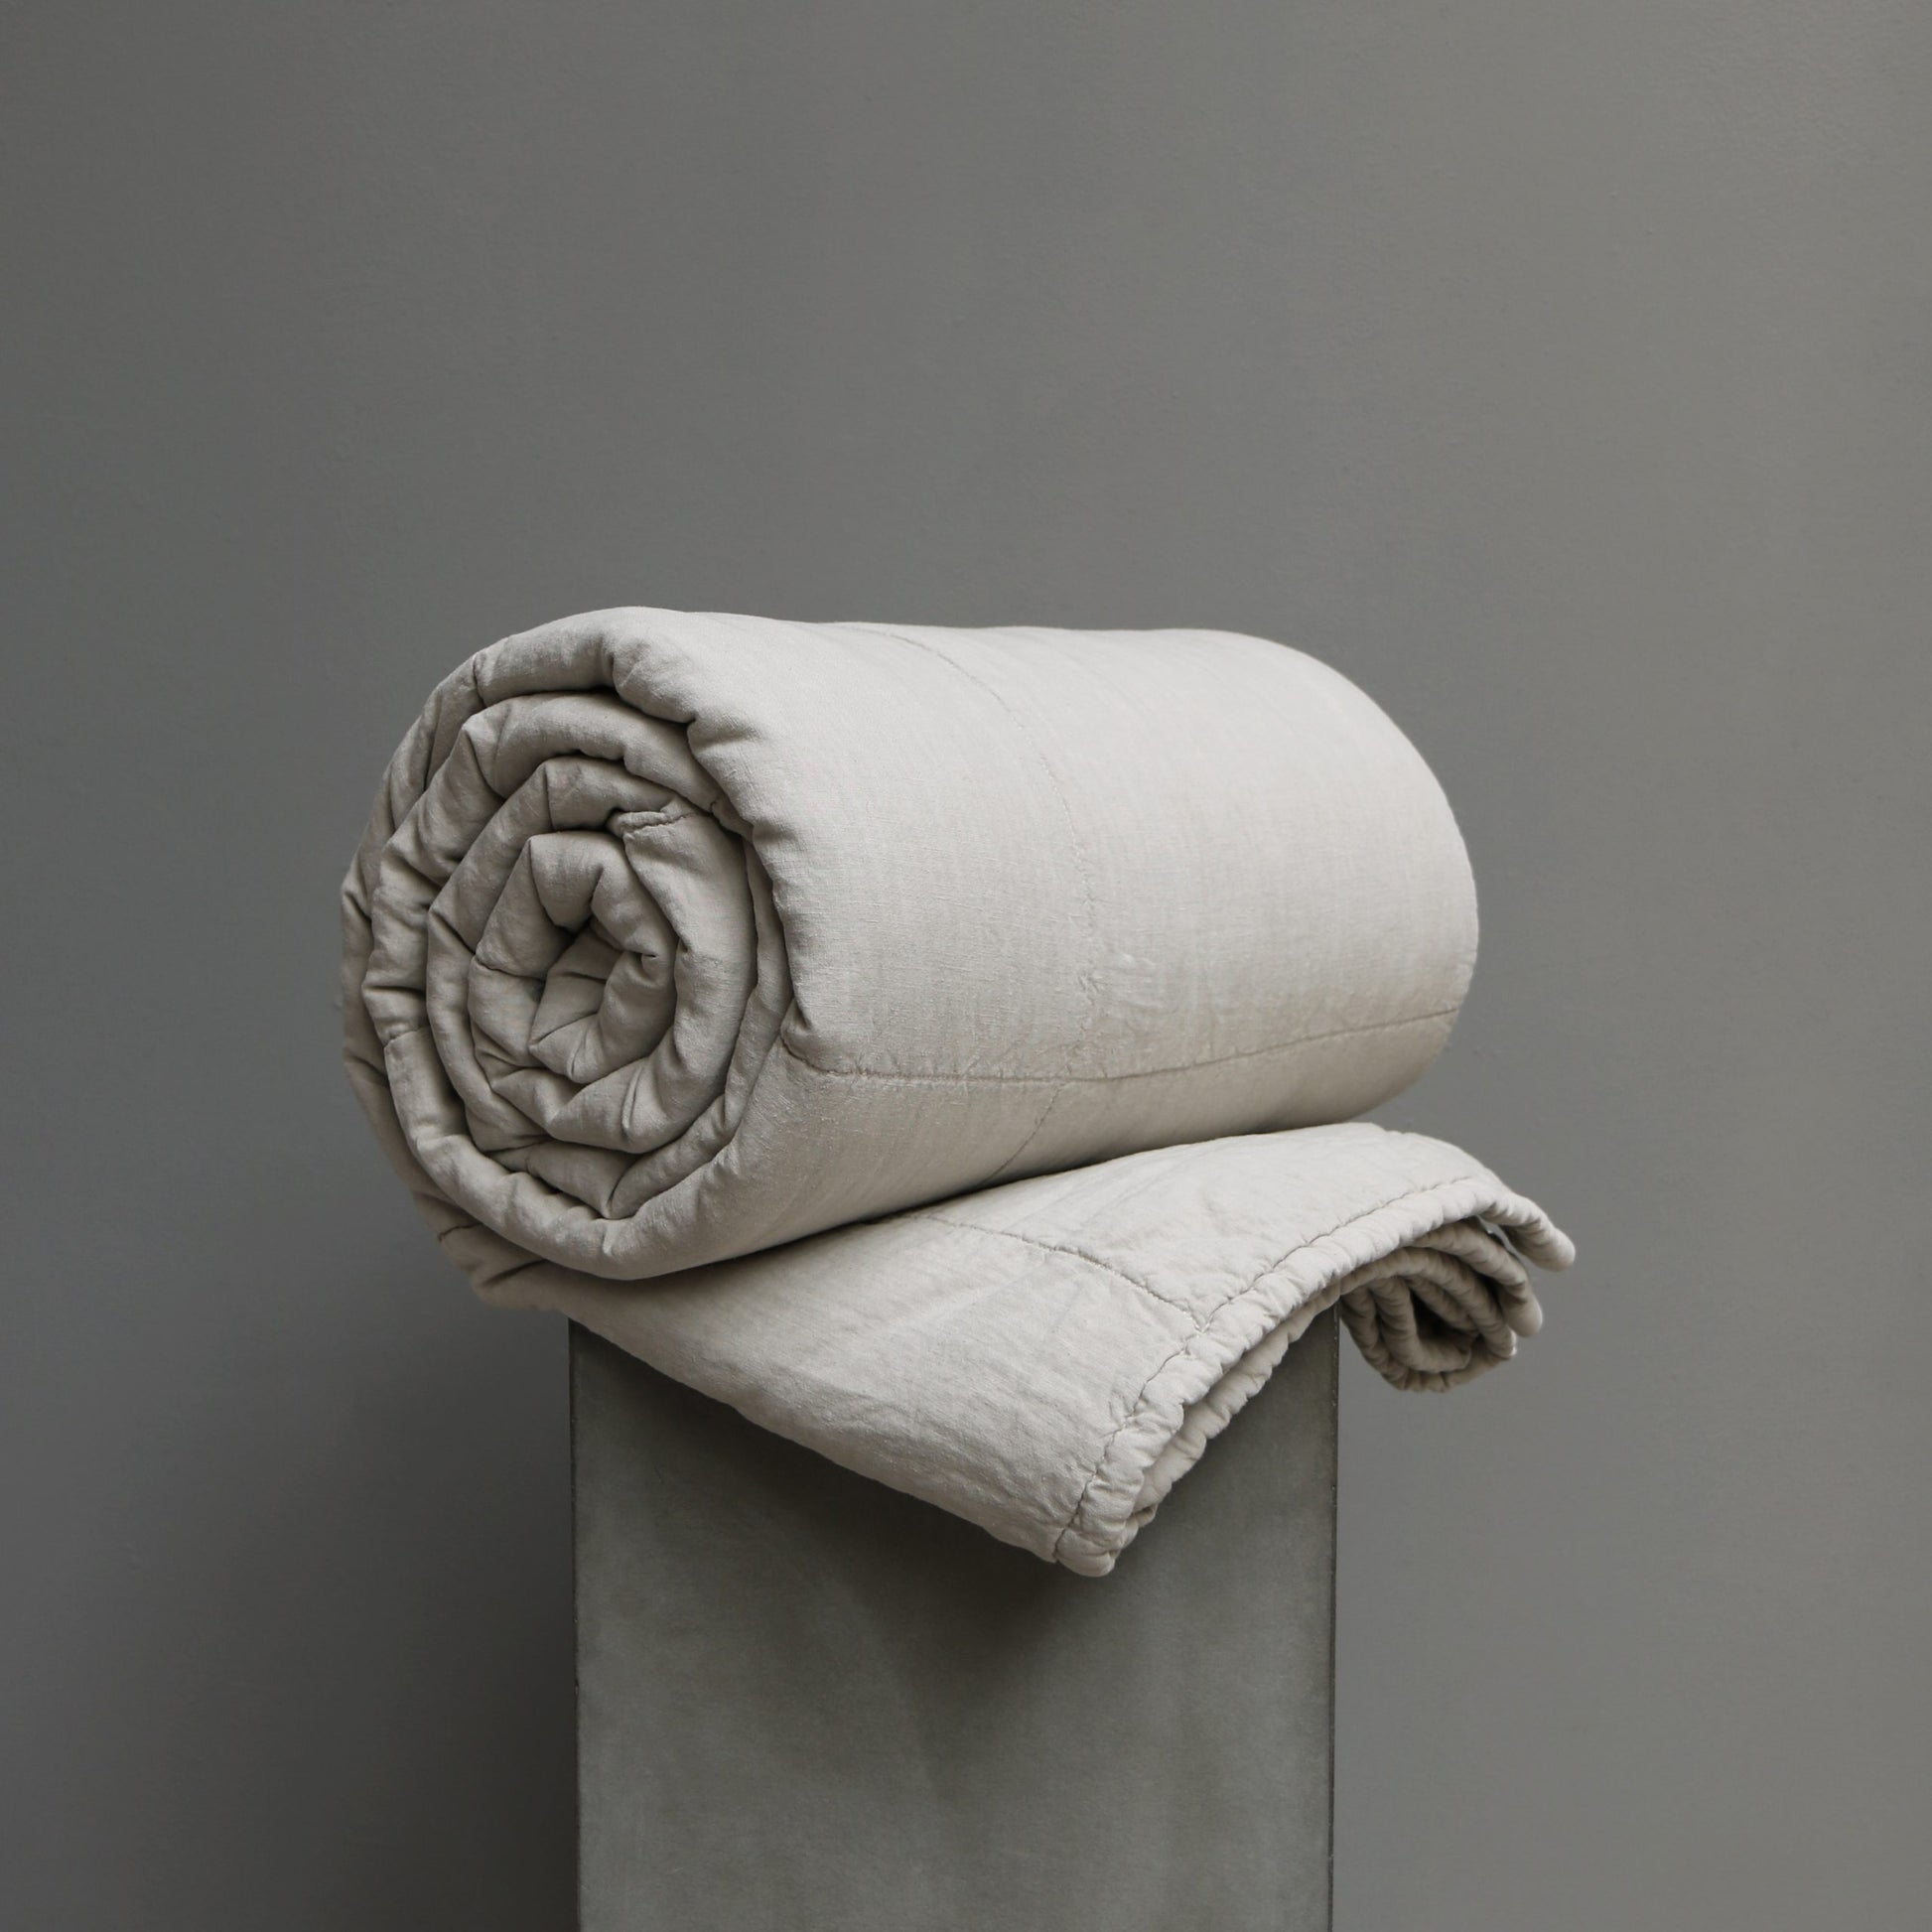 Quilted blanket high quality linen by Society Limonta at Studio Oliver Gustav